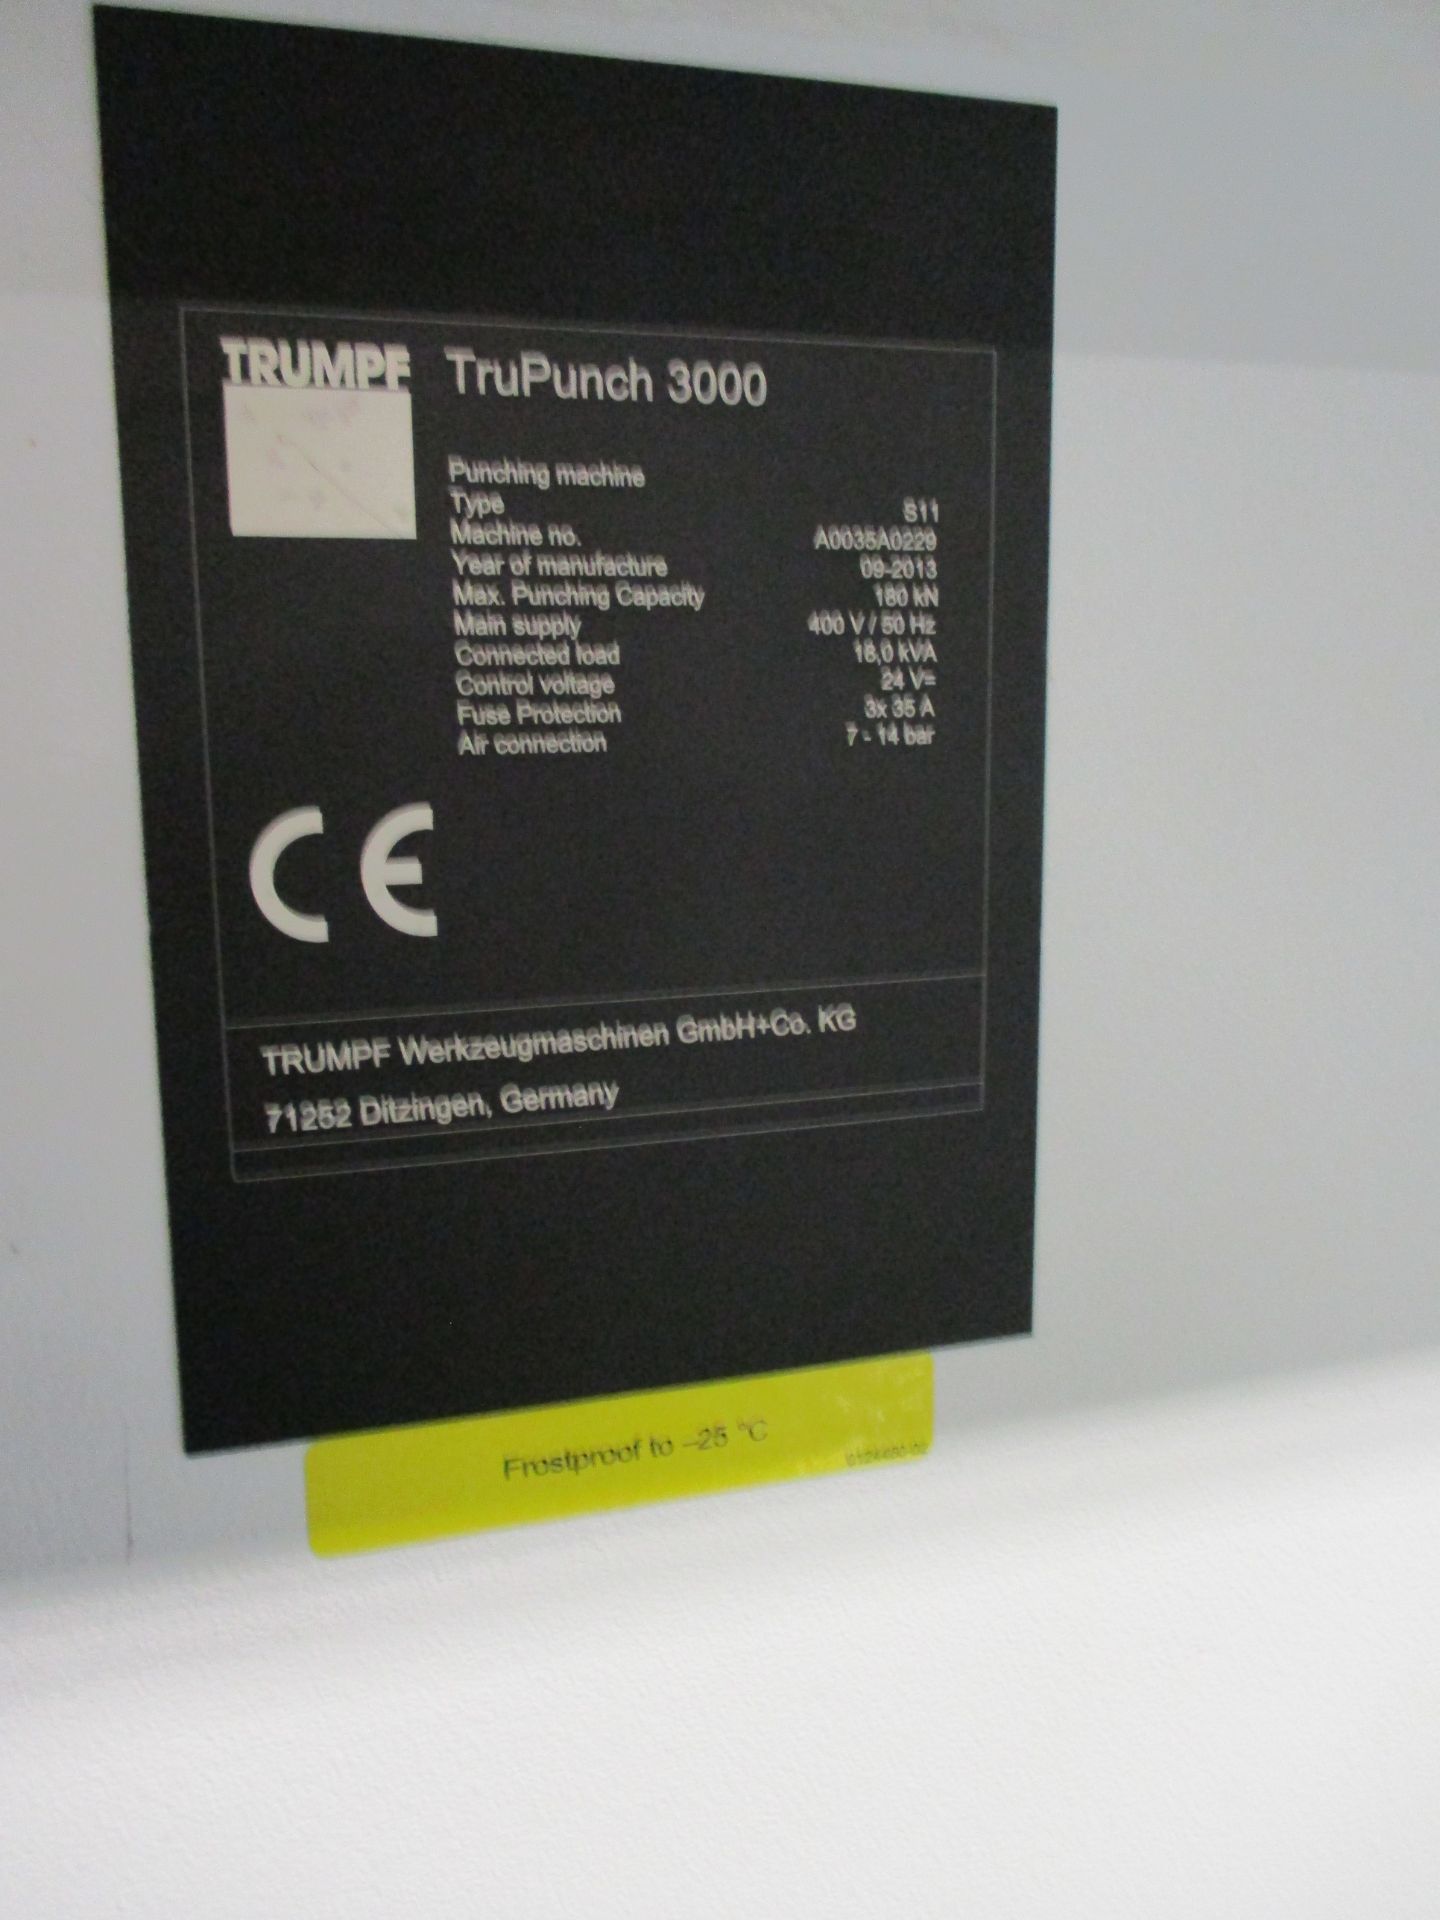 Trumpf TruPunch 3000 Type S11 Universal CNC Punching Machine, serial no. A0035A0229, year of - Image 14 of 24